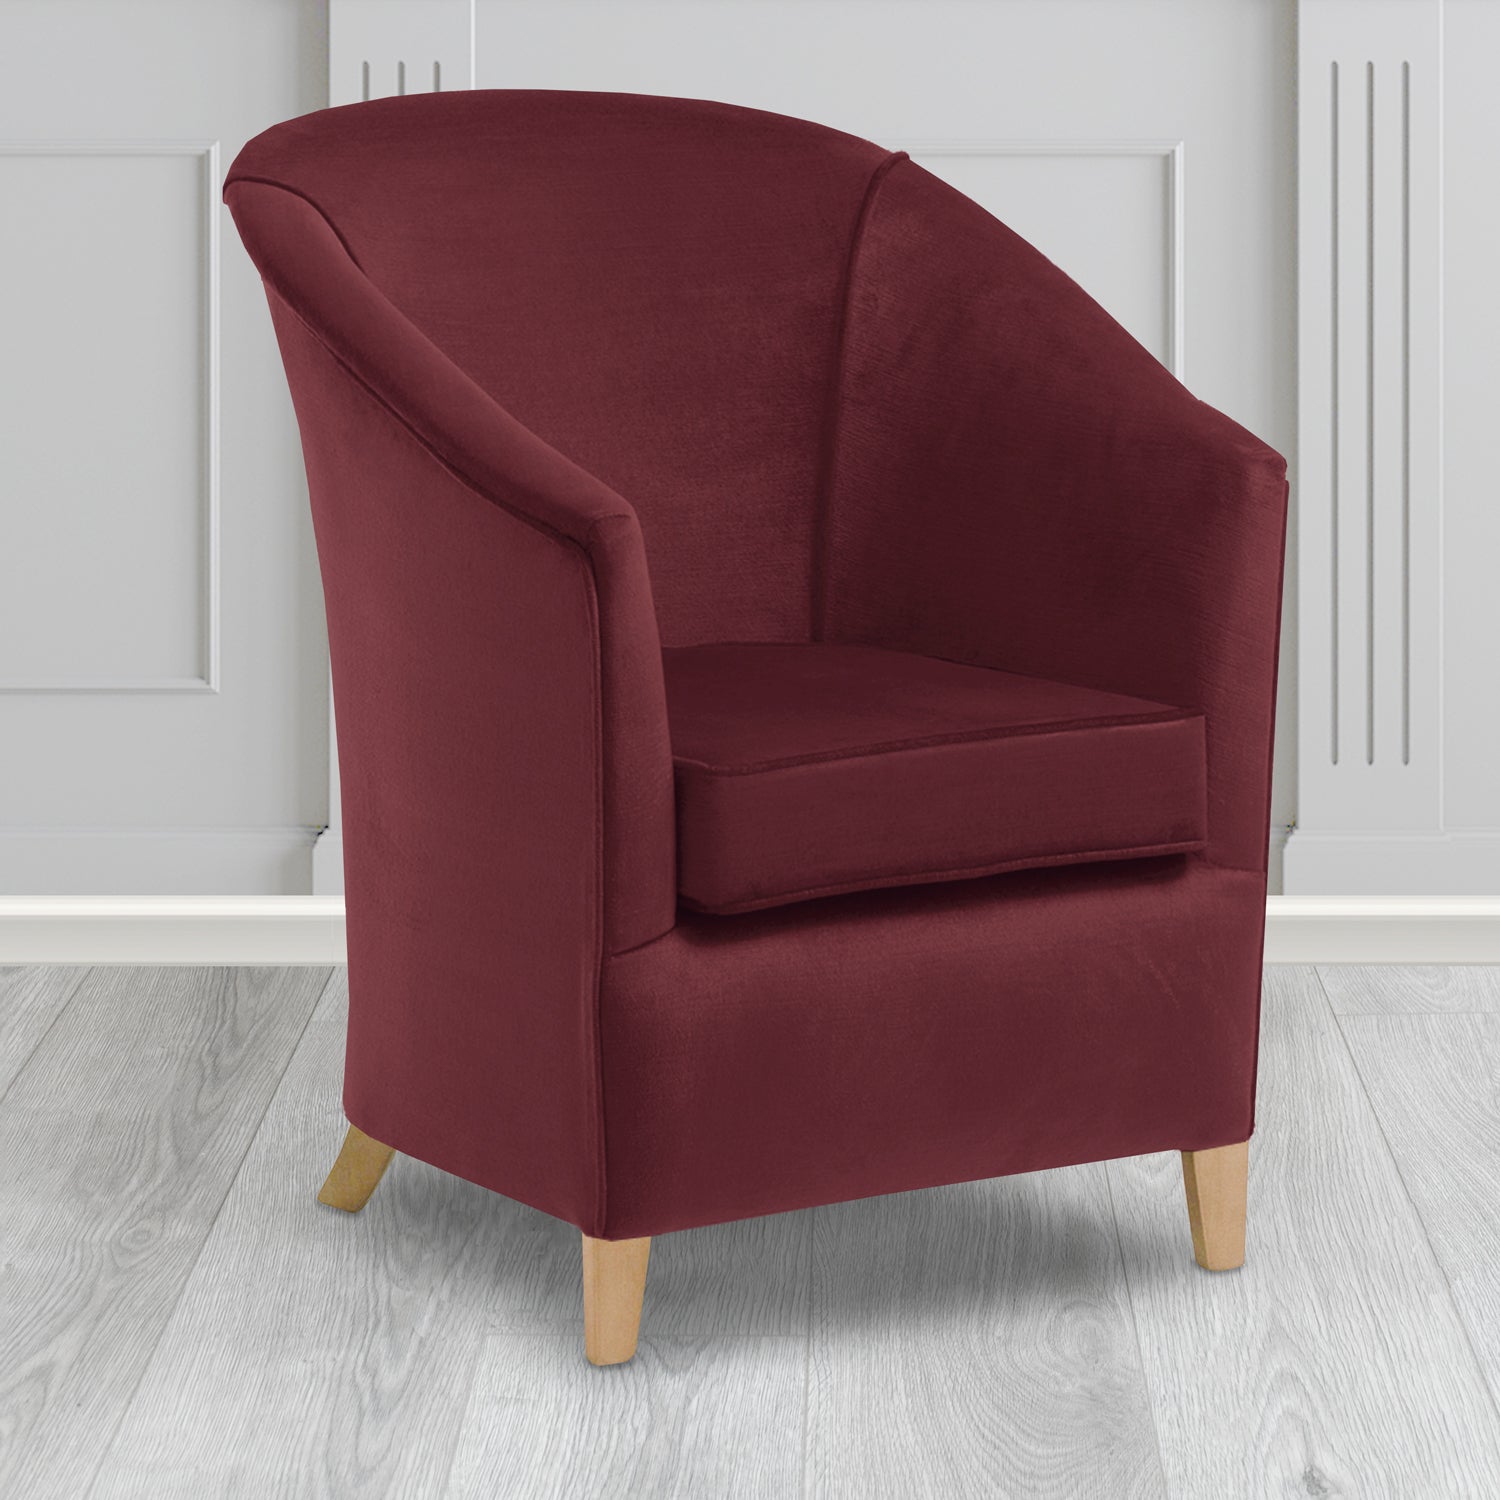 Bolton Tub Chair in Noble 414 Wine Crib 5 Velvet Fabric - Water Resistant - The Tub Chair Shop